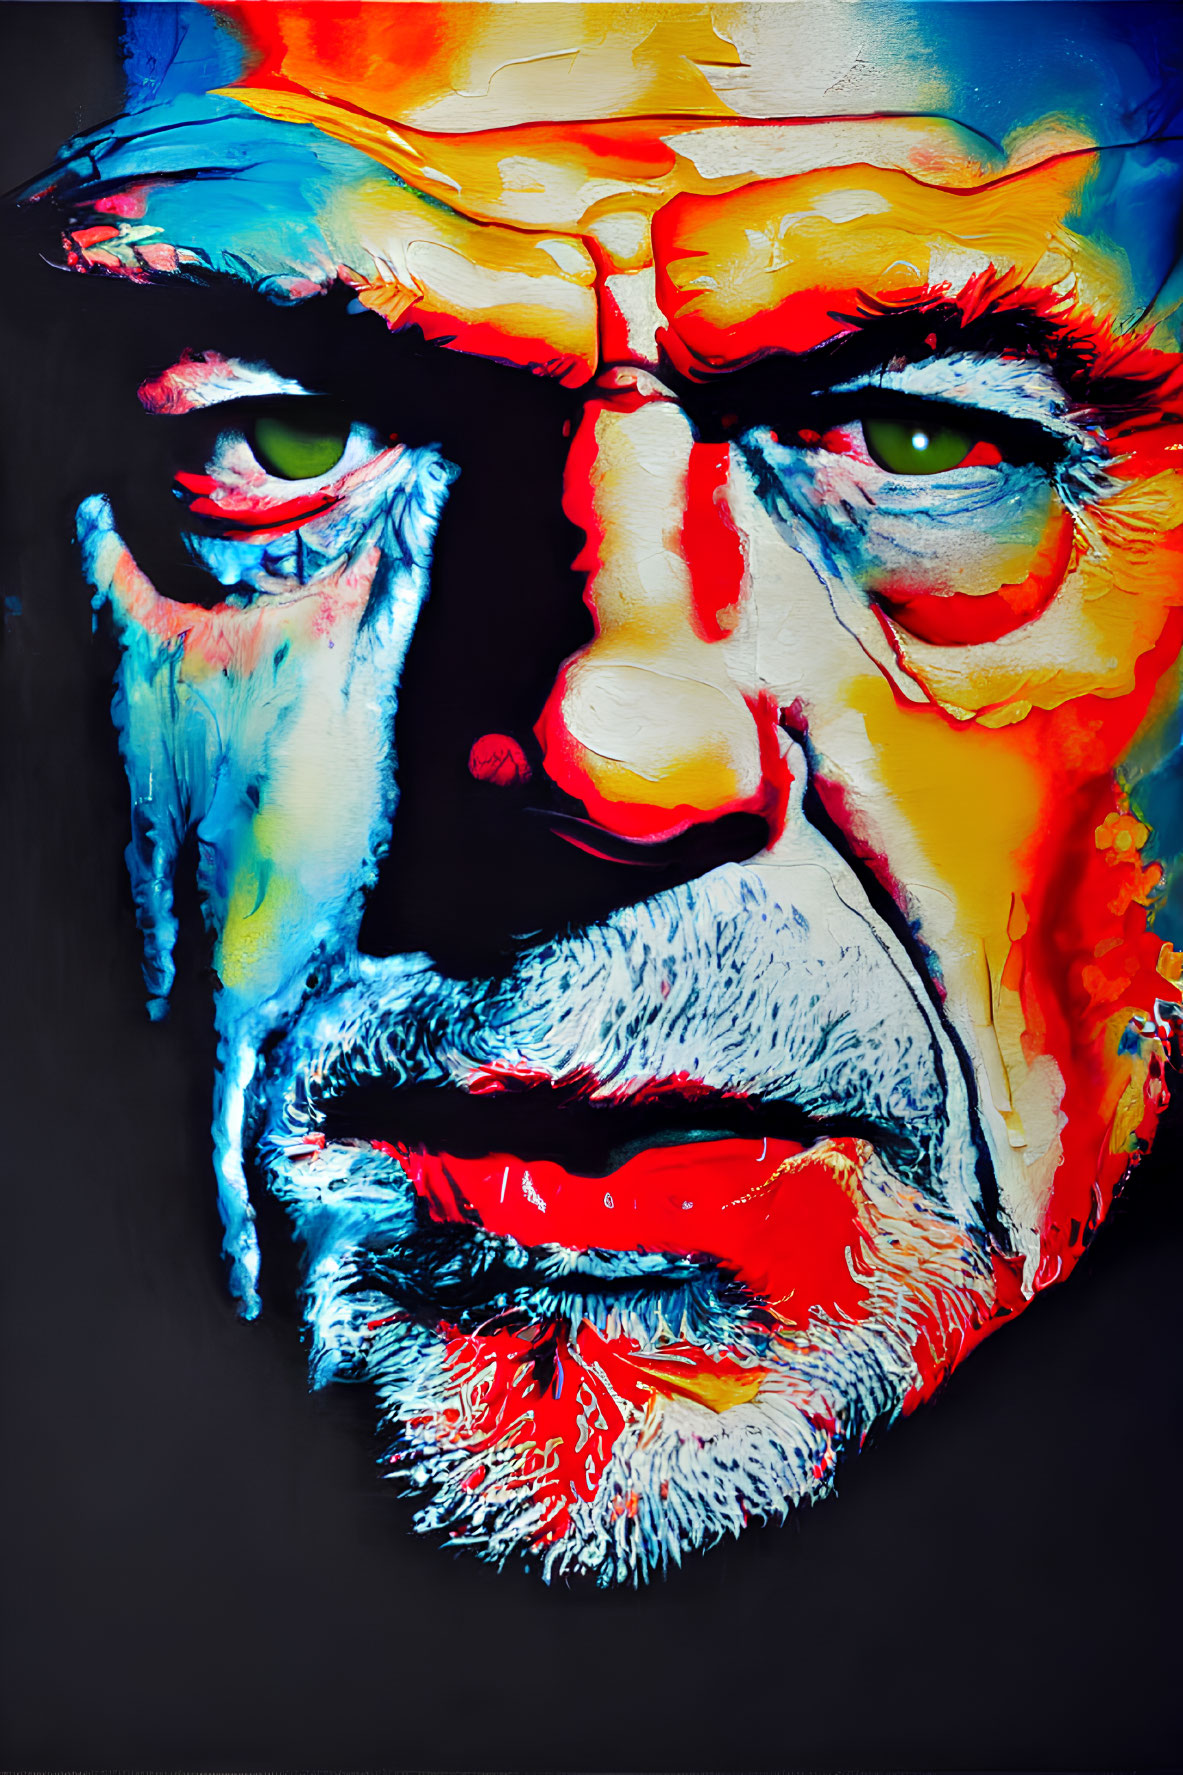 Vibrant abstract portrait with red and blue hues and dominant eye